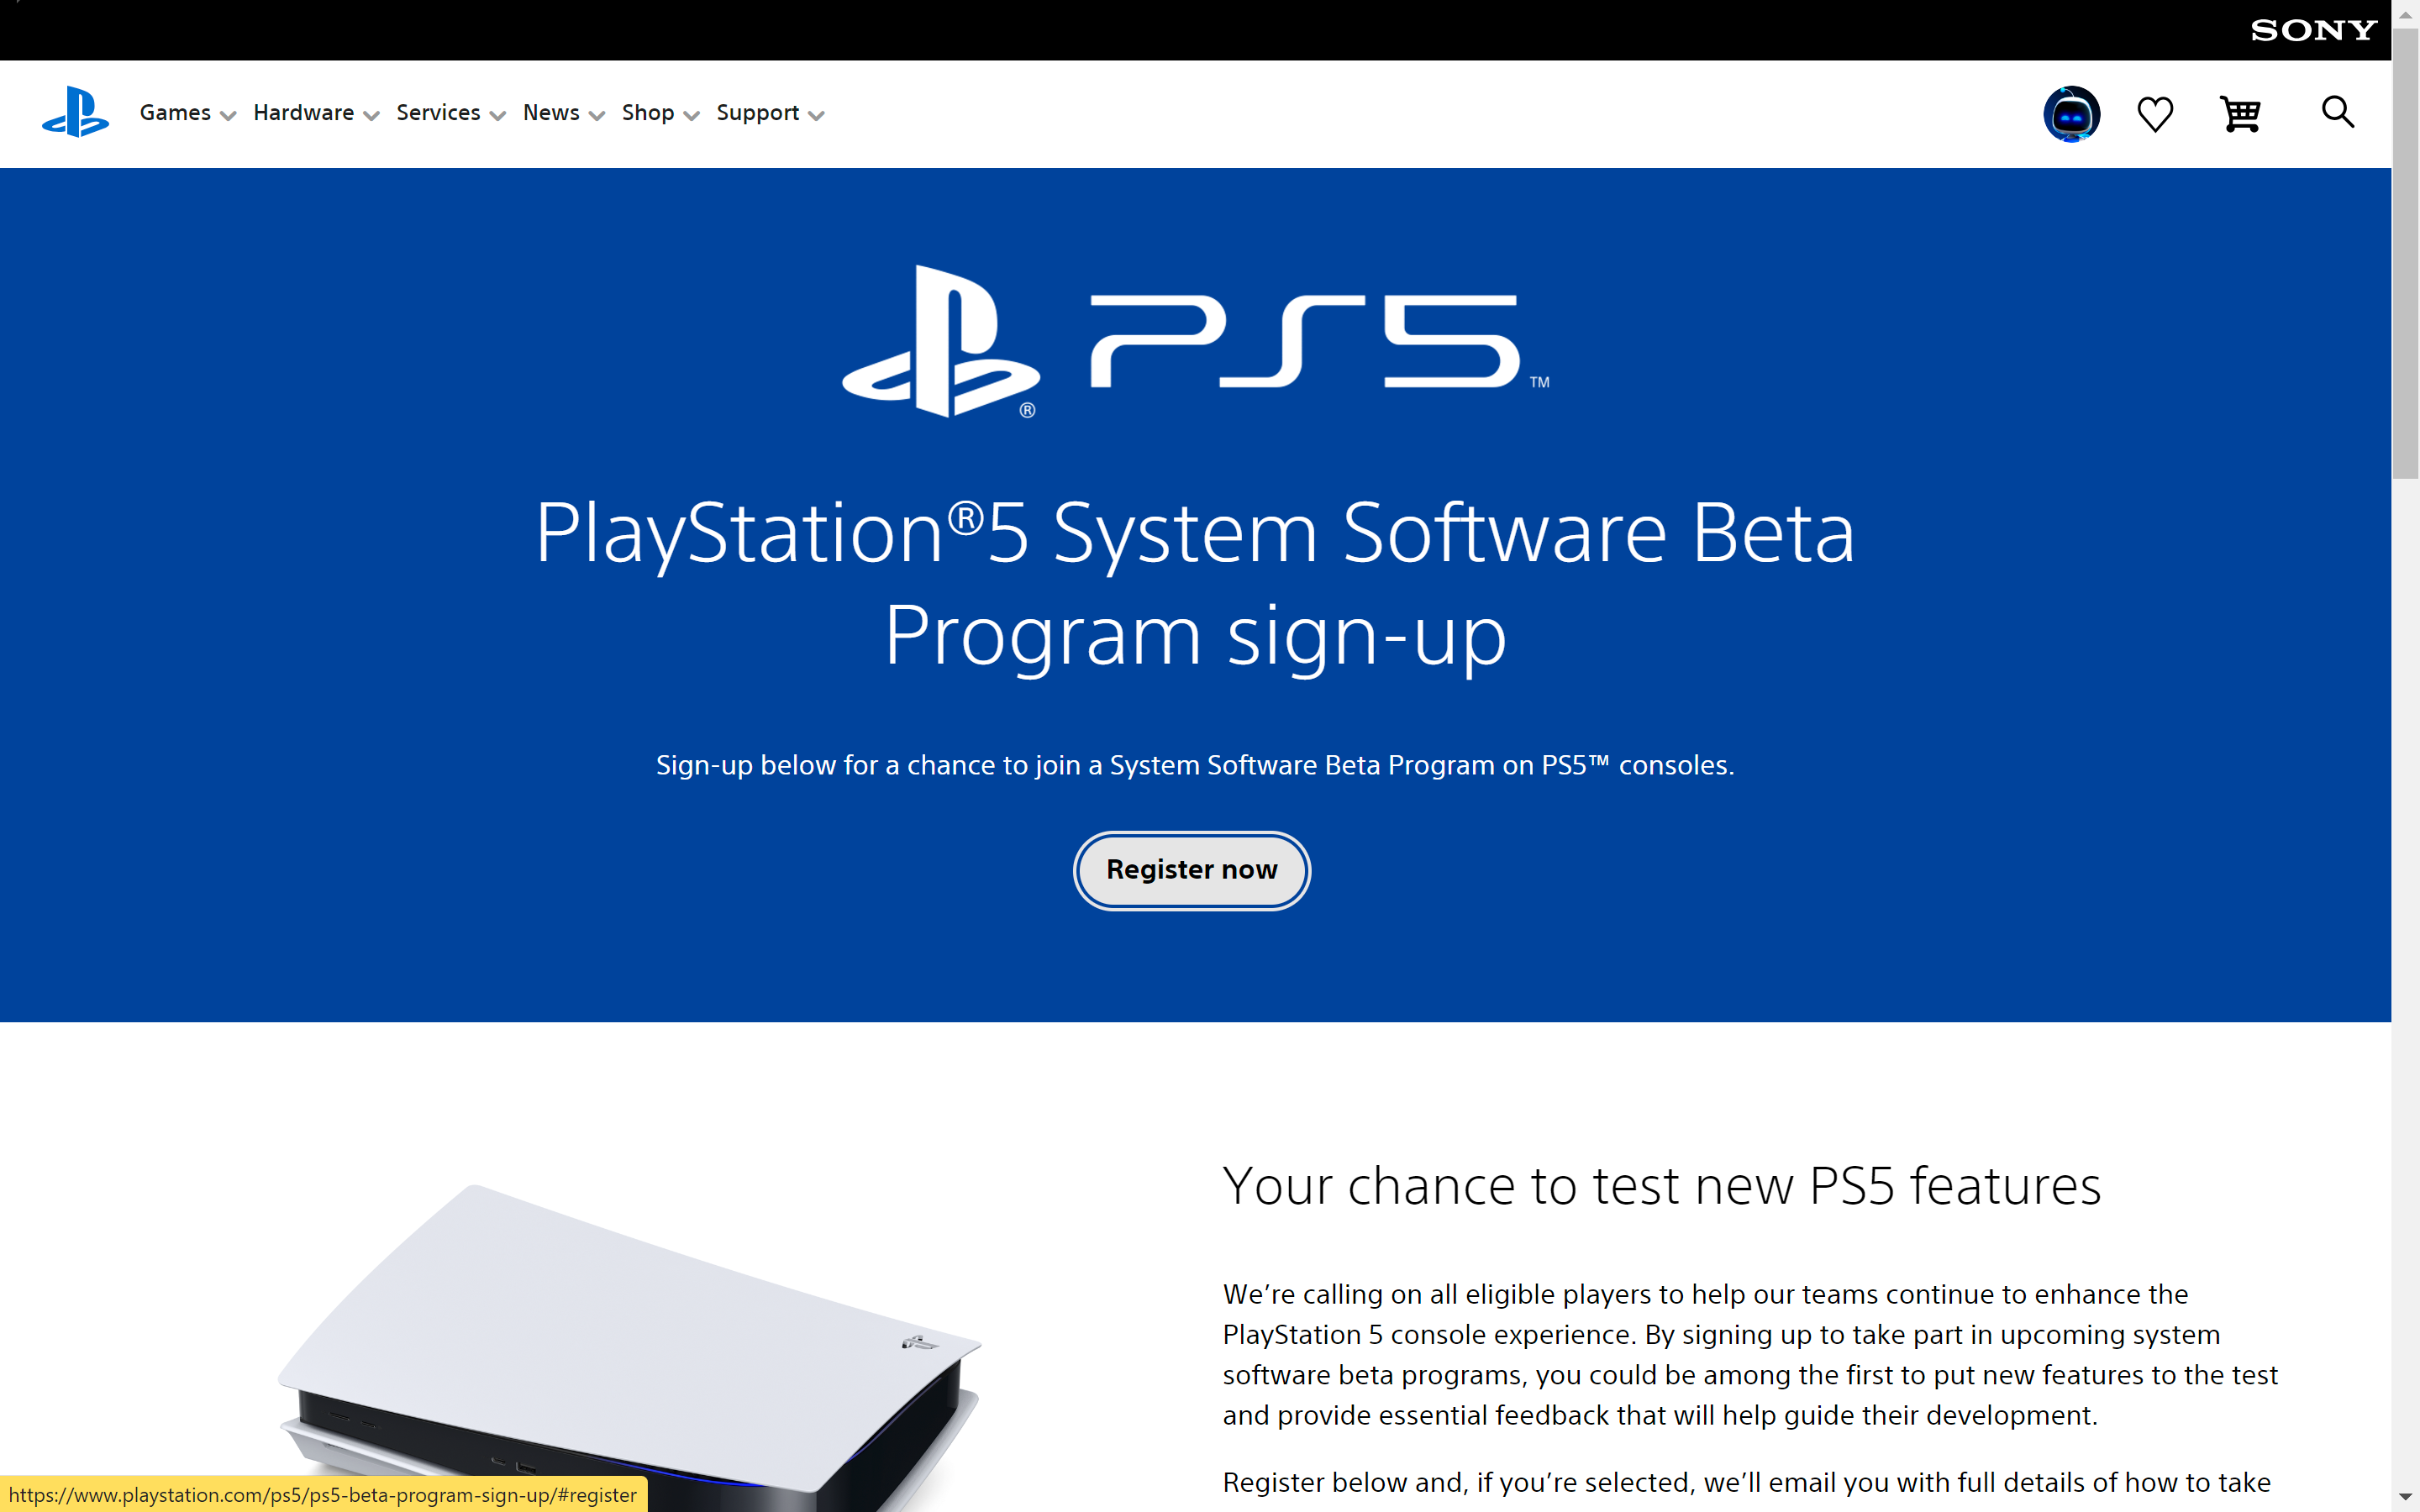 How to sign up to the PS5 beta